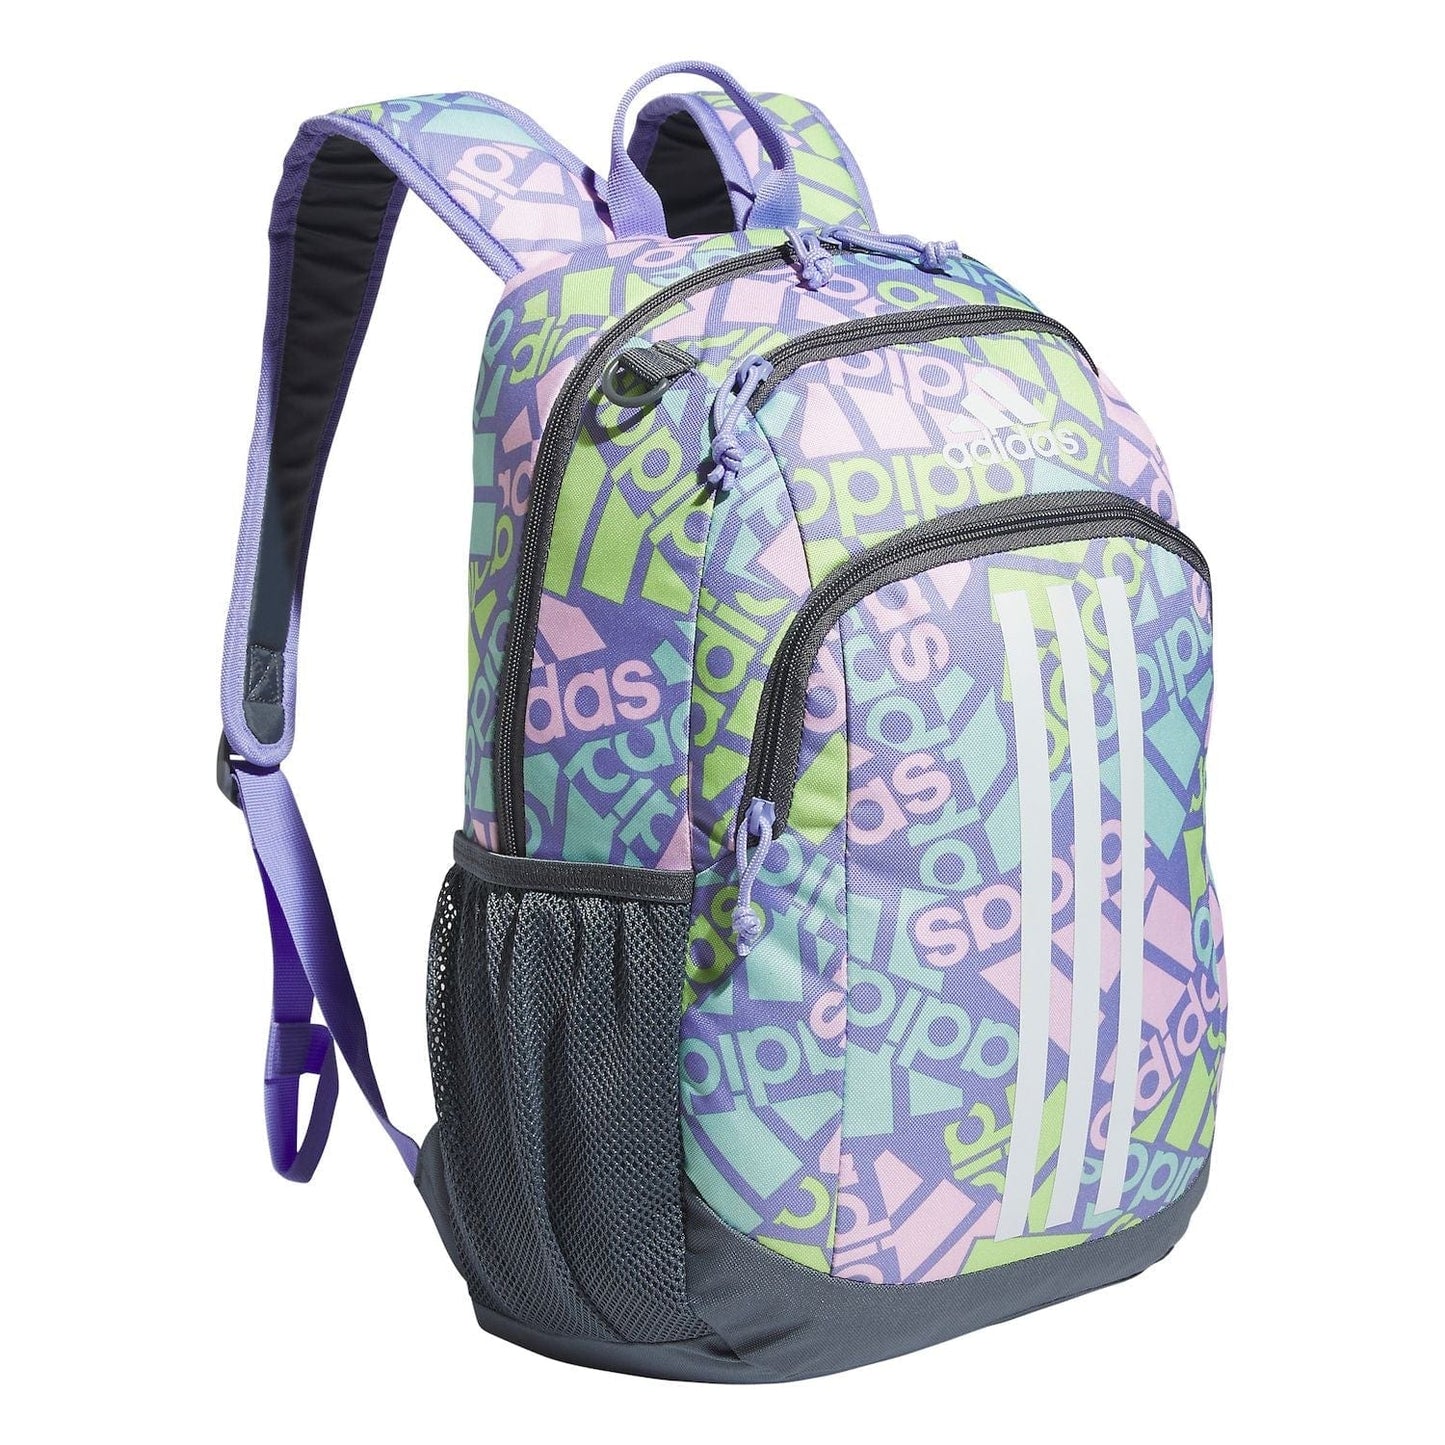 Young BTS Creator 2 Kids Backpack - CLASSY CLOSET BOUTIQUEYoung BTS Creator 2 Kids Backpackbackpack4844672Adi Multi Collage